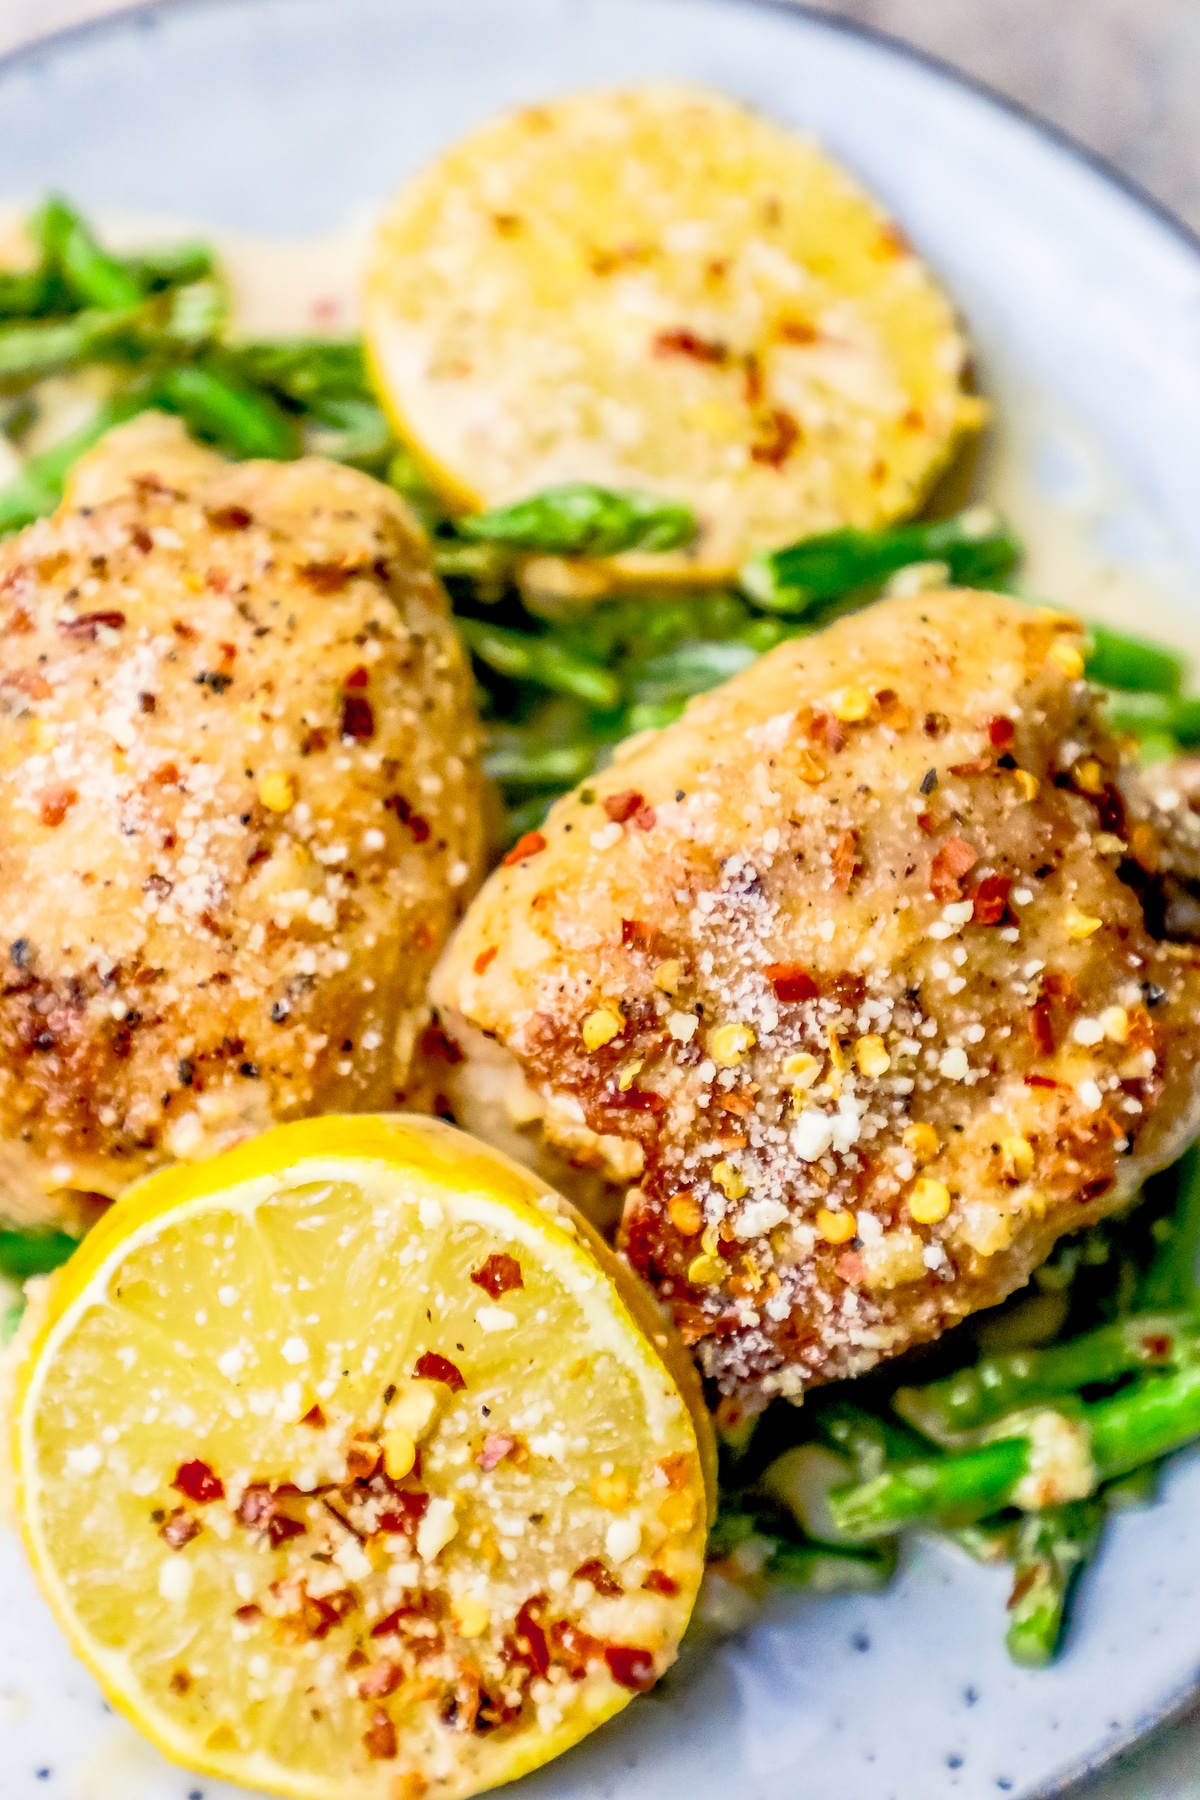 chicken thigh sand lemons on asparagus with seasonings